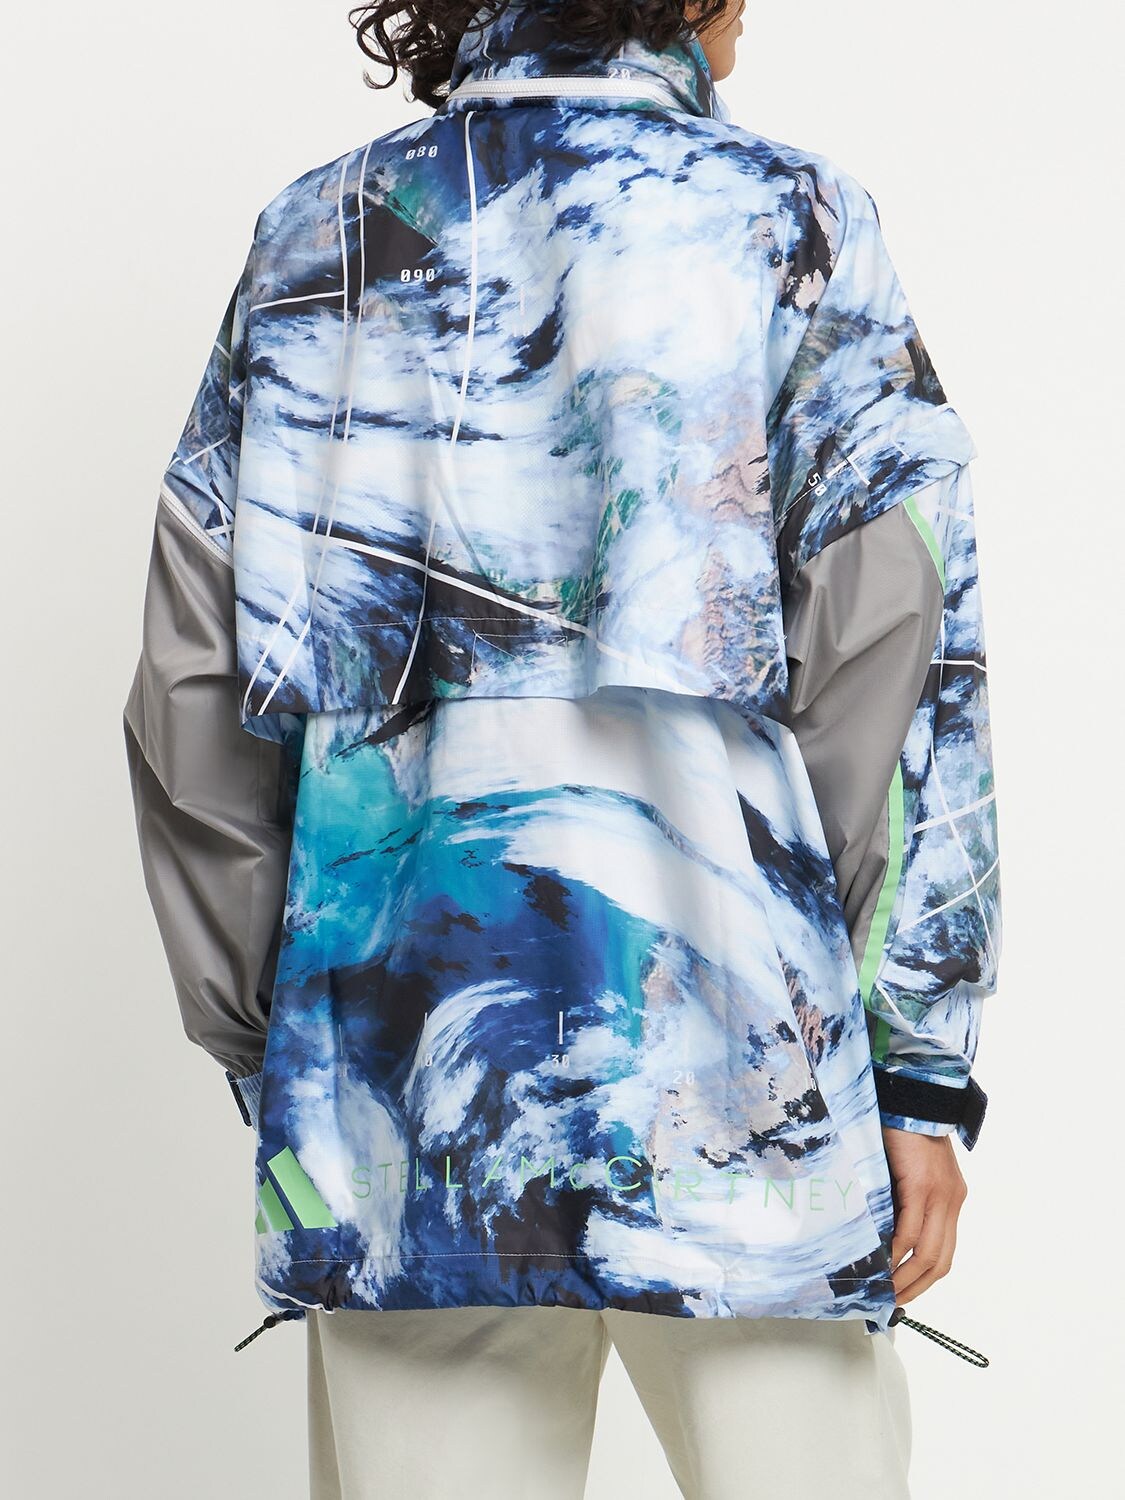 Adidas By Stella Mccartney Truenature Hover Float Print Packable Jacket In Whitemultcodovgry